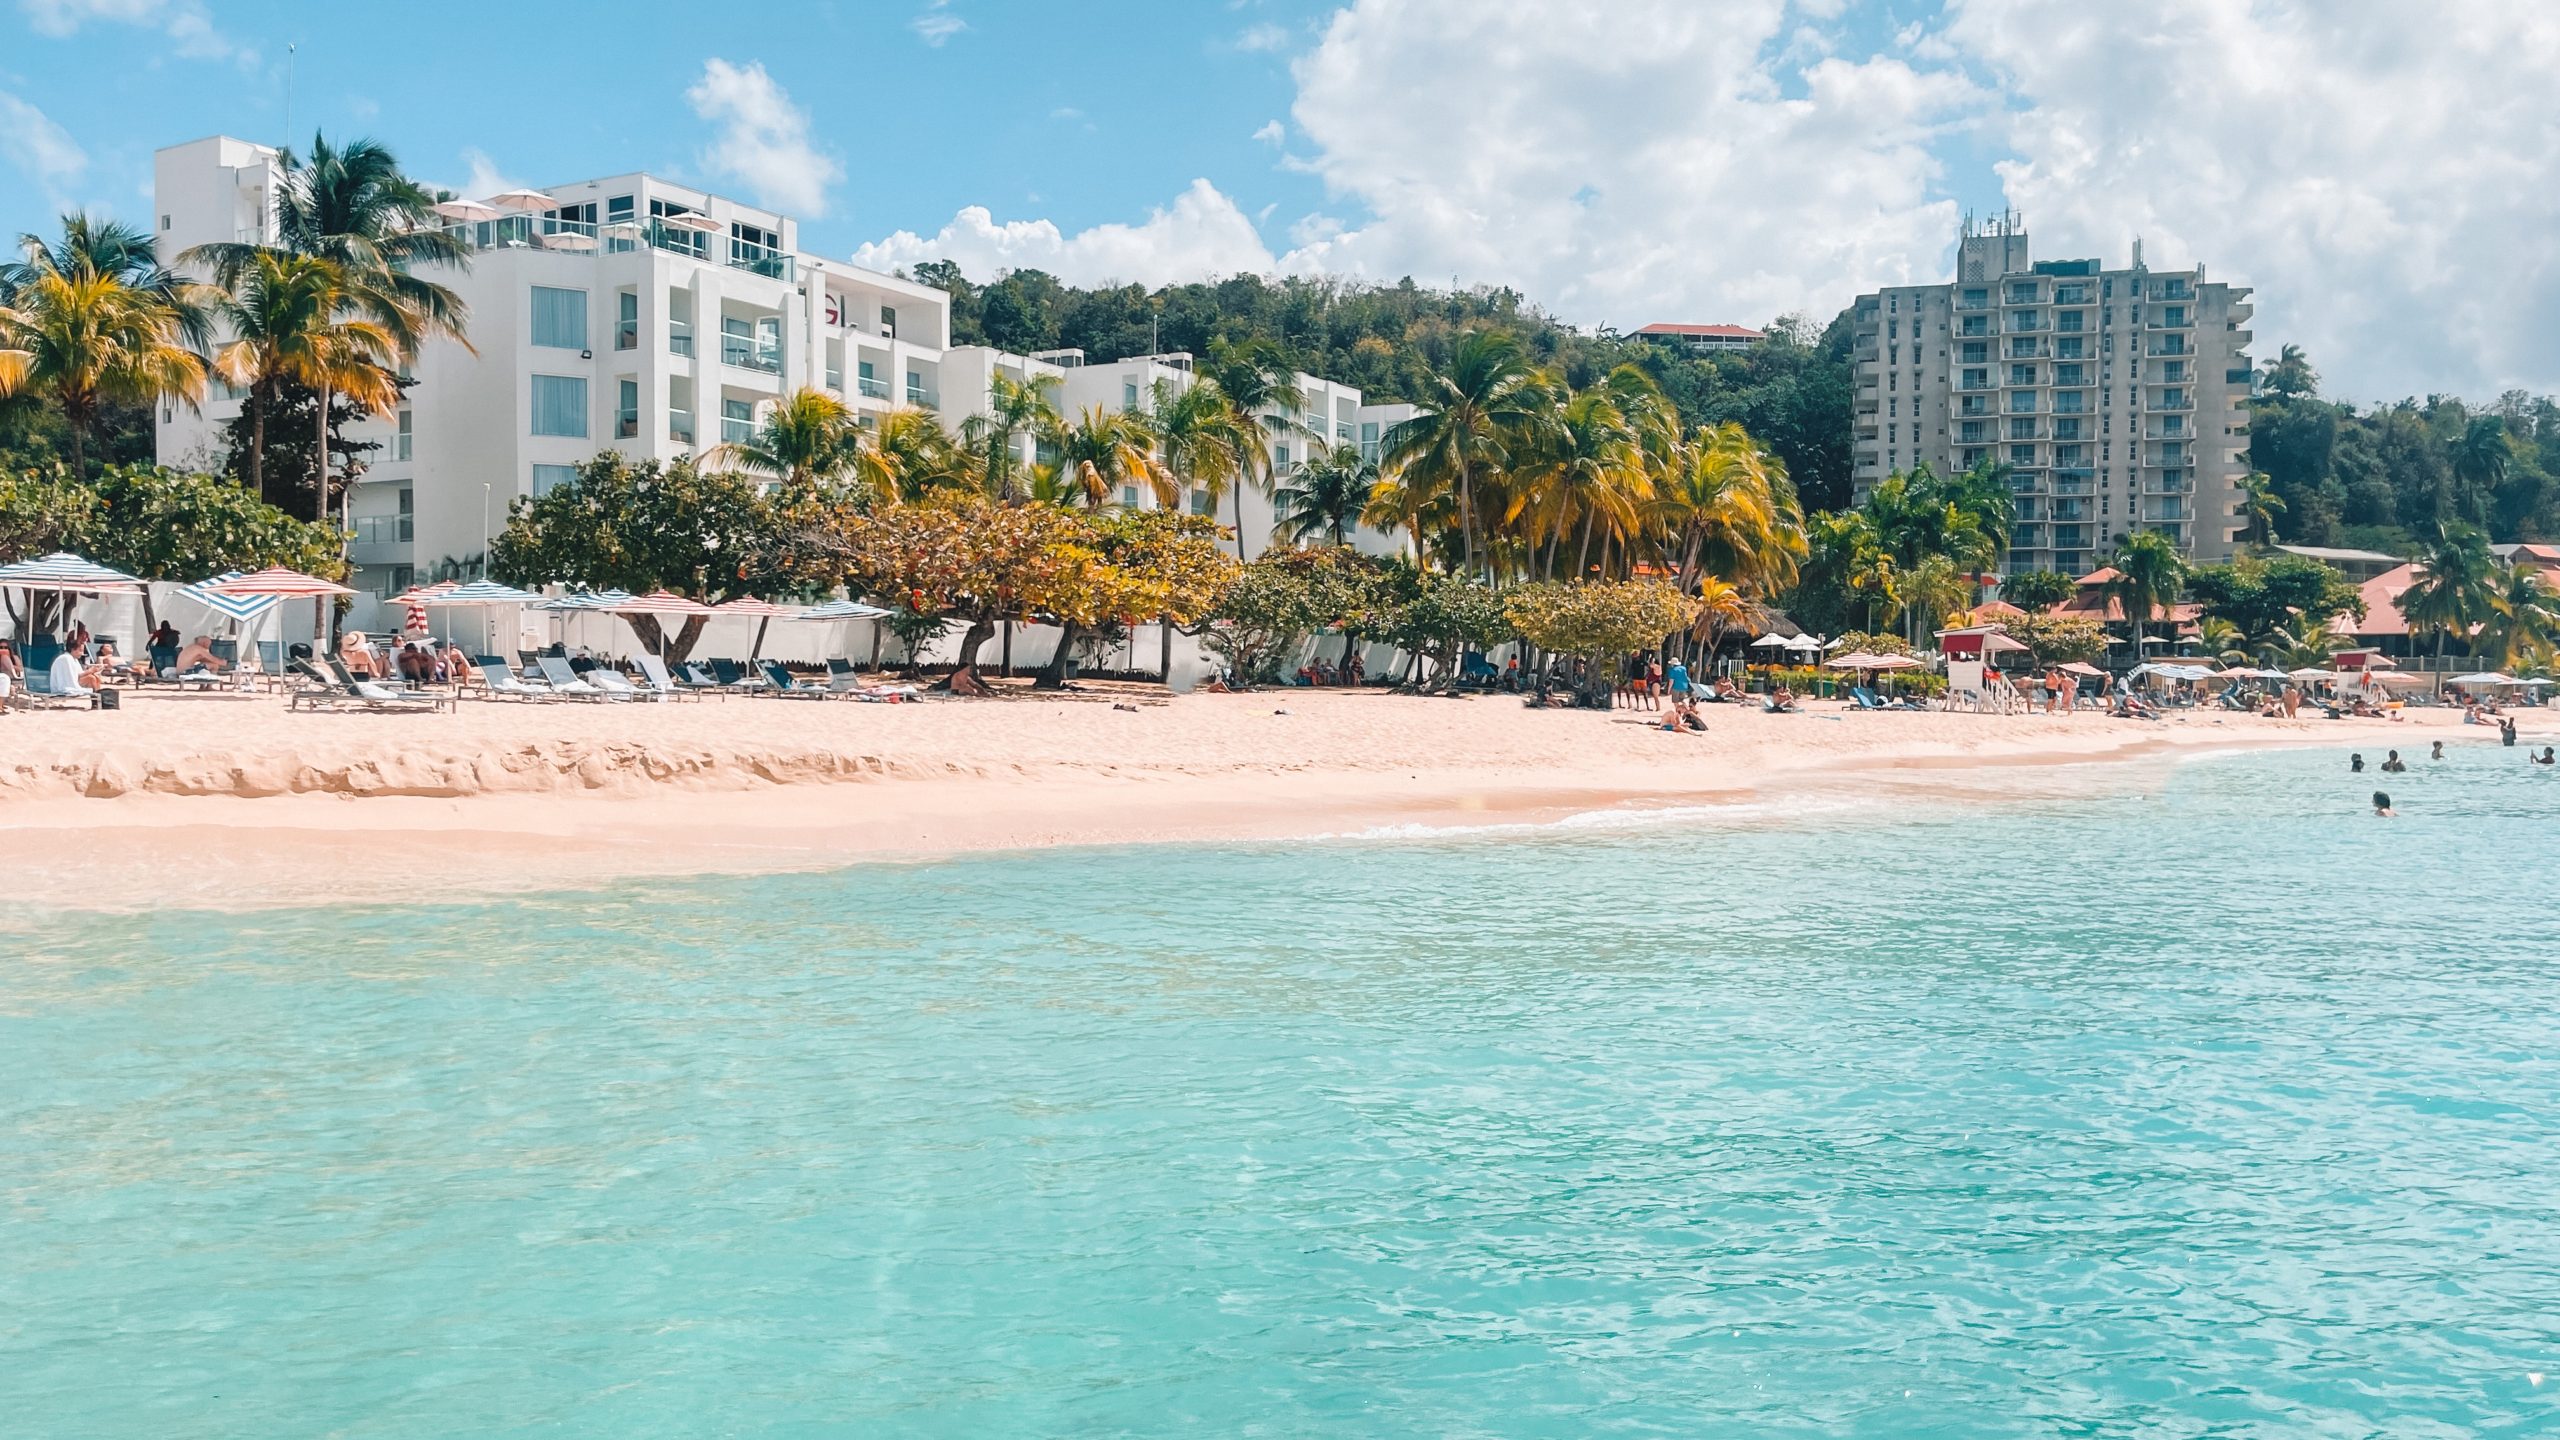 The Ultimate Guide to Montego Bay, Jamaica • The Daydream Diaries